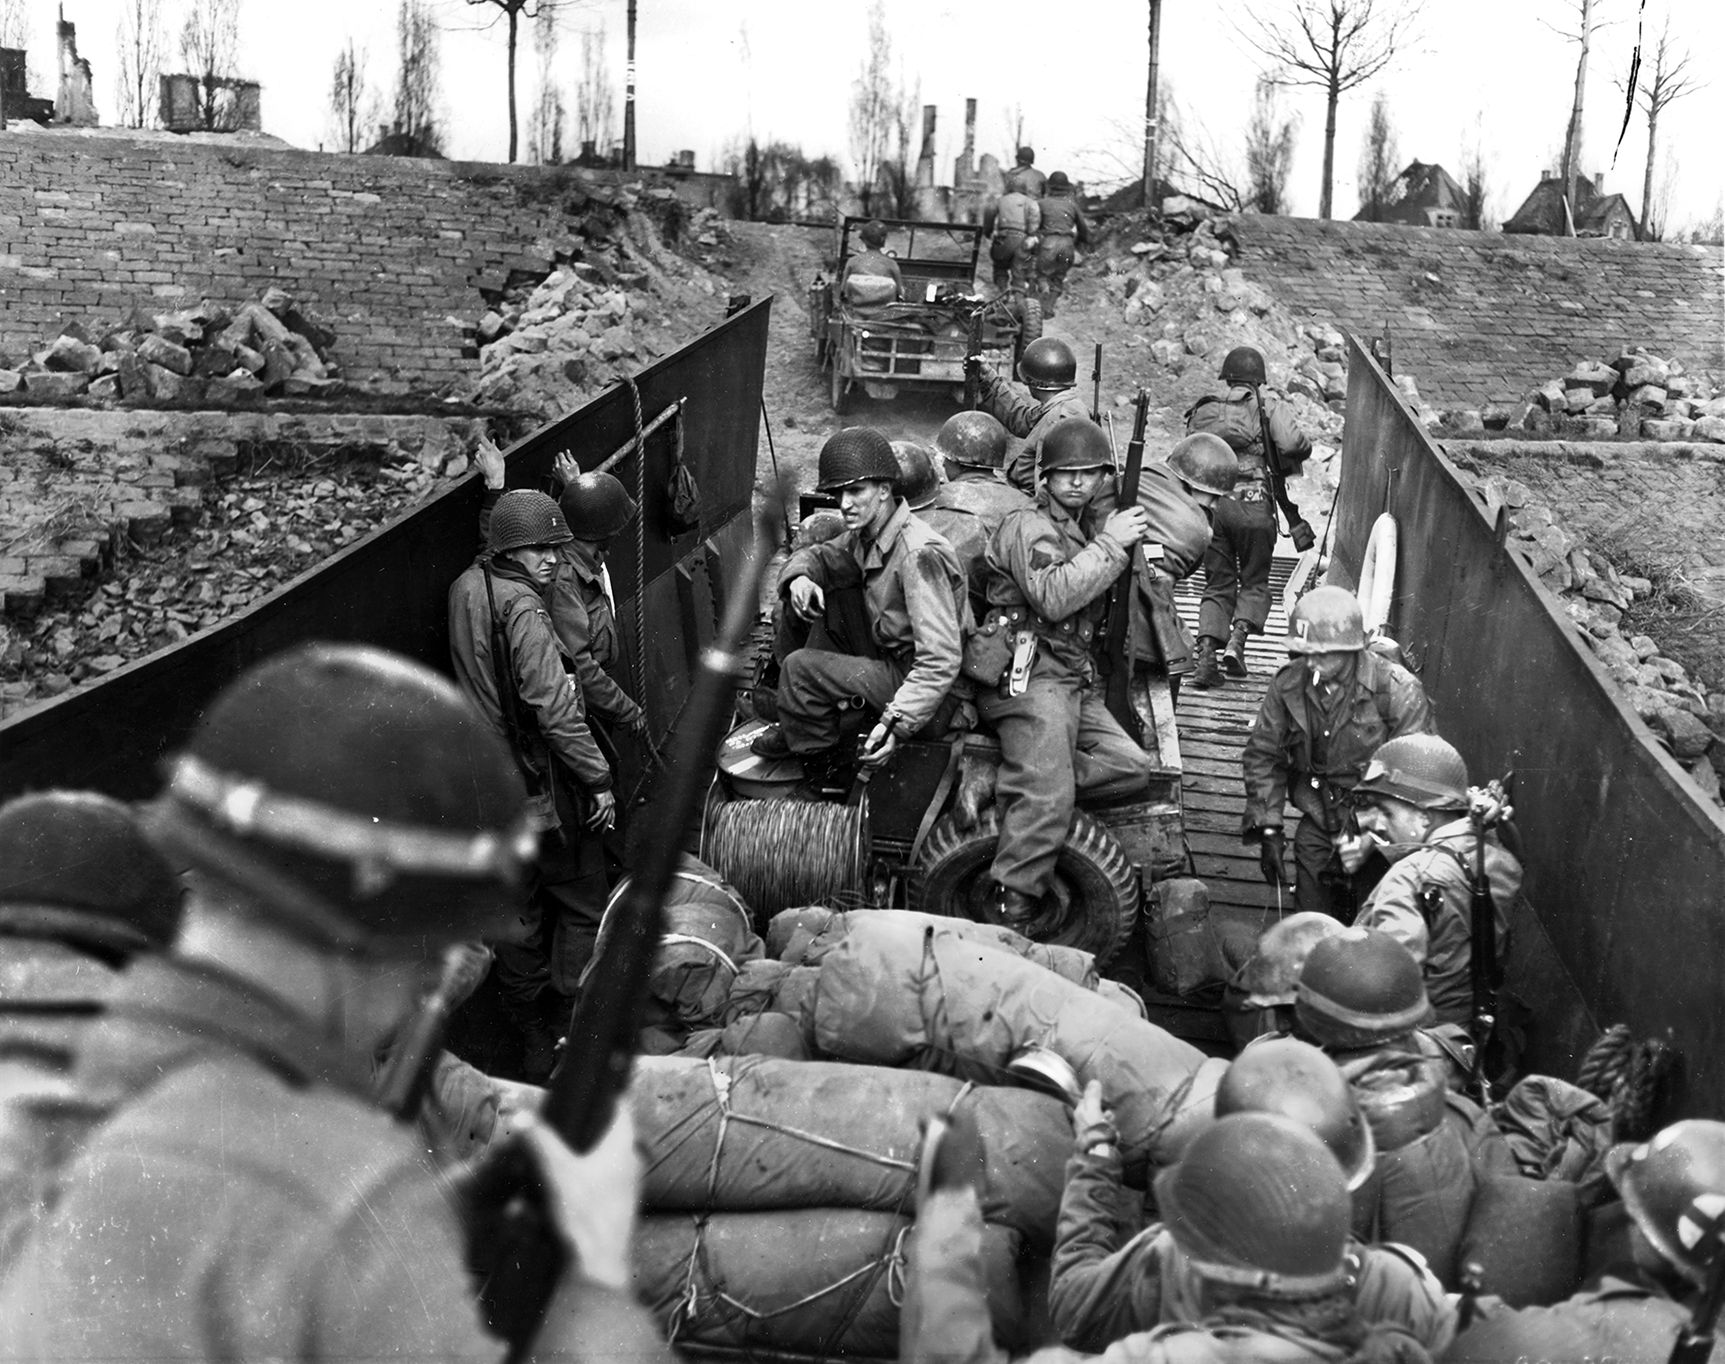 Men and vehicles of the 80th U.S. Infantry Division load into Coast Guard-operated landing craft on the west side of the Rhine prior to making the crossing. The U.S. Navy and Coast Guard were instrumental in transporting troops over the river.